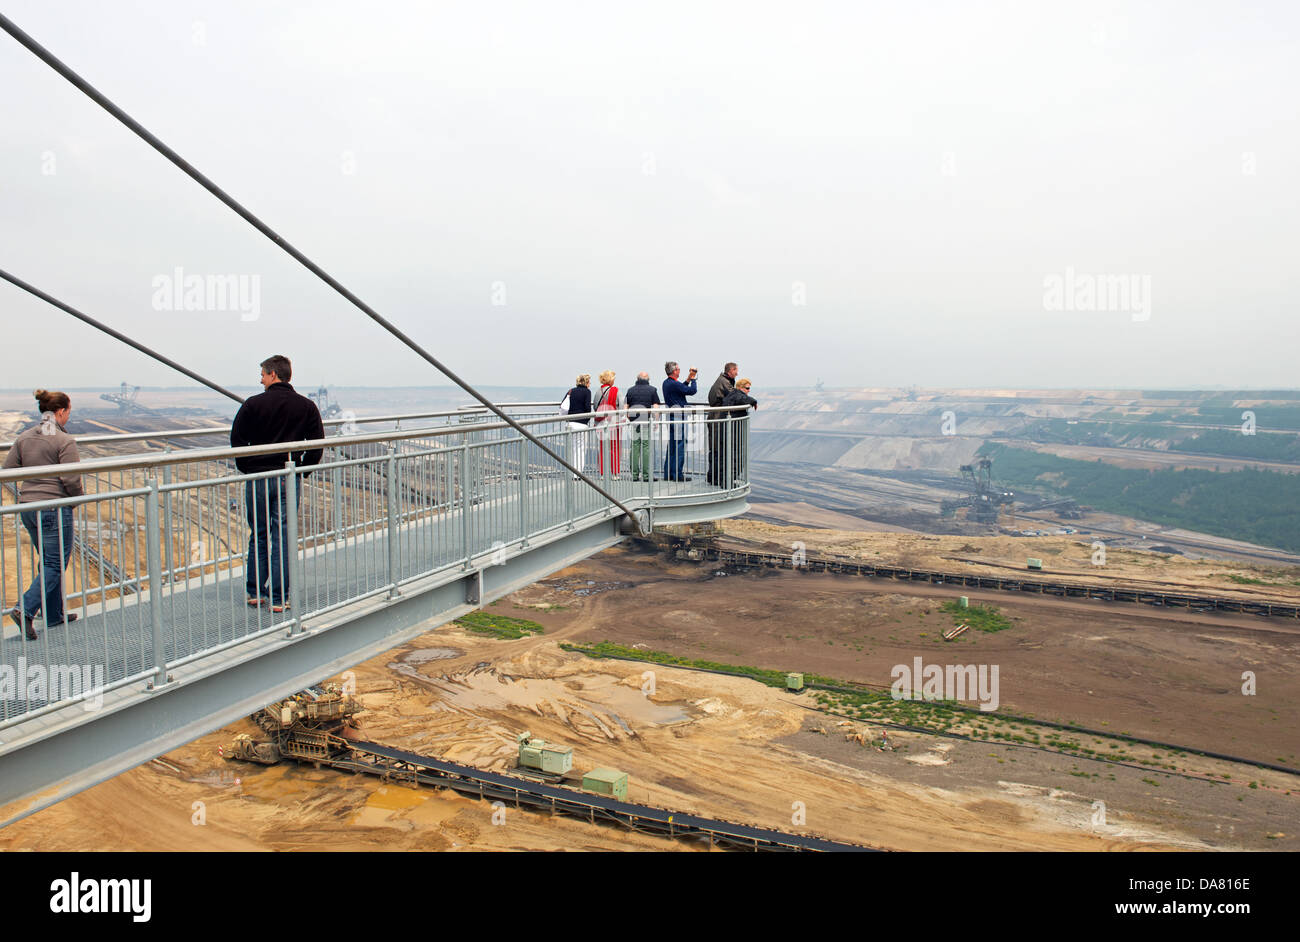 An elevated 'skywalk' for the public to view the Tagebau (surface mine) Garzweiler, Germany. Stock Photo